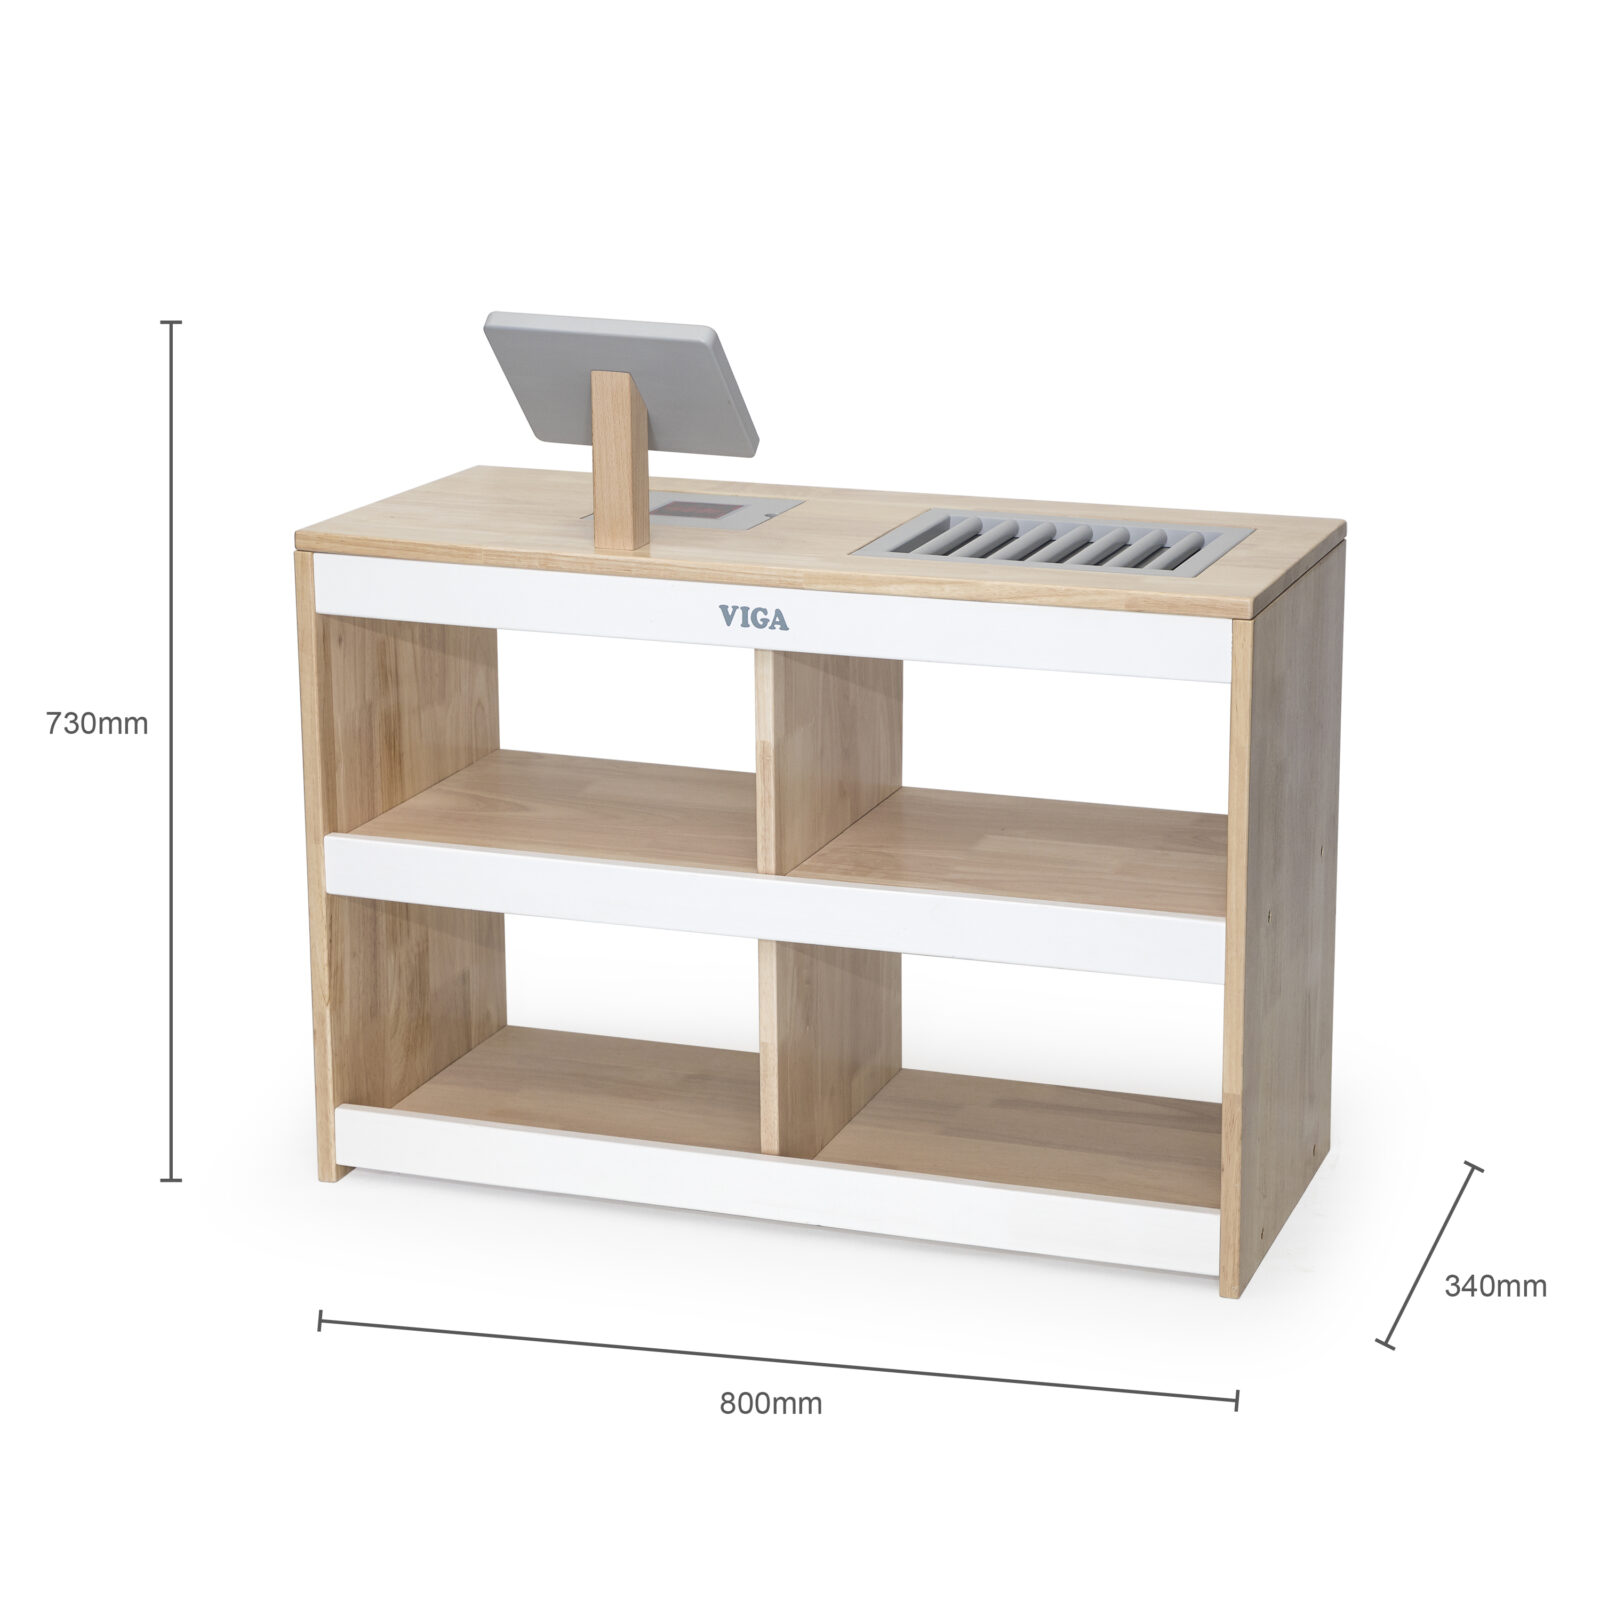 display stand dimensions